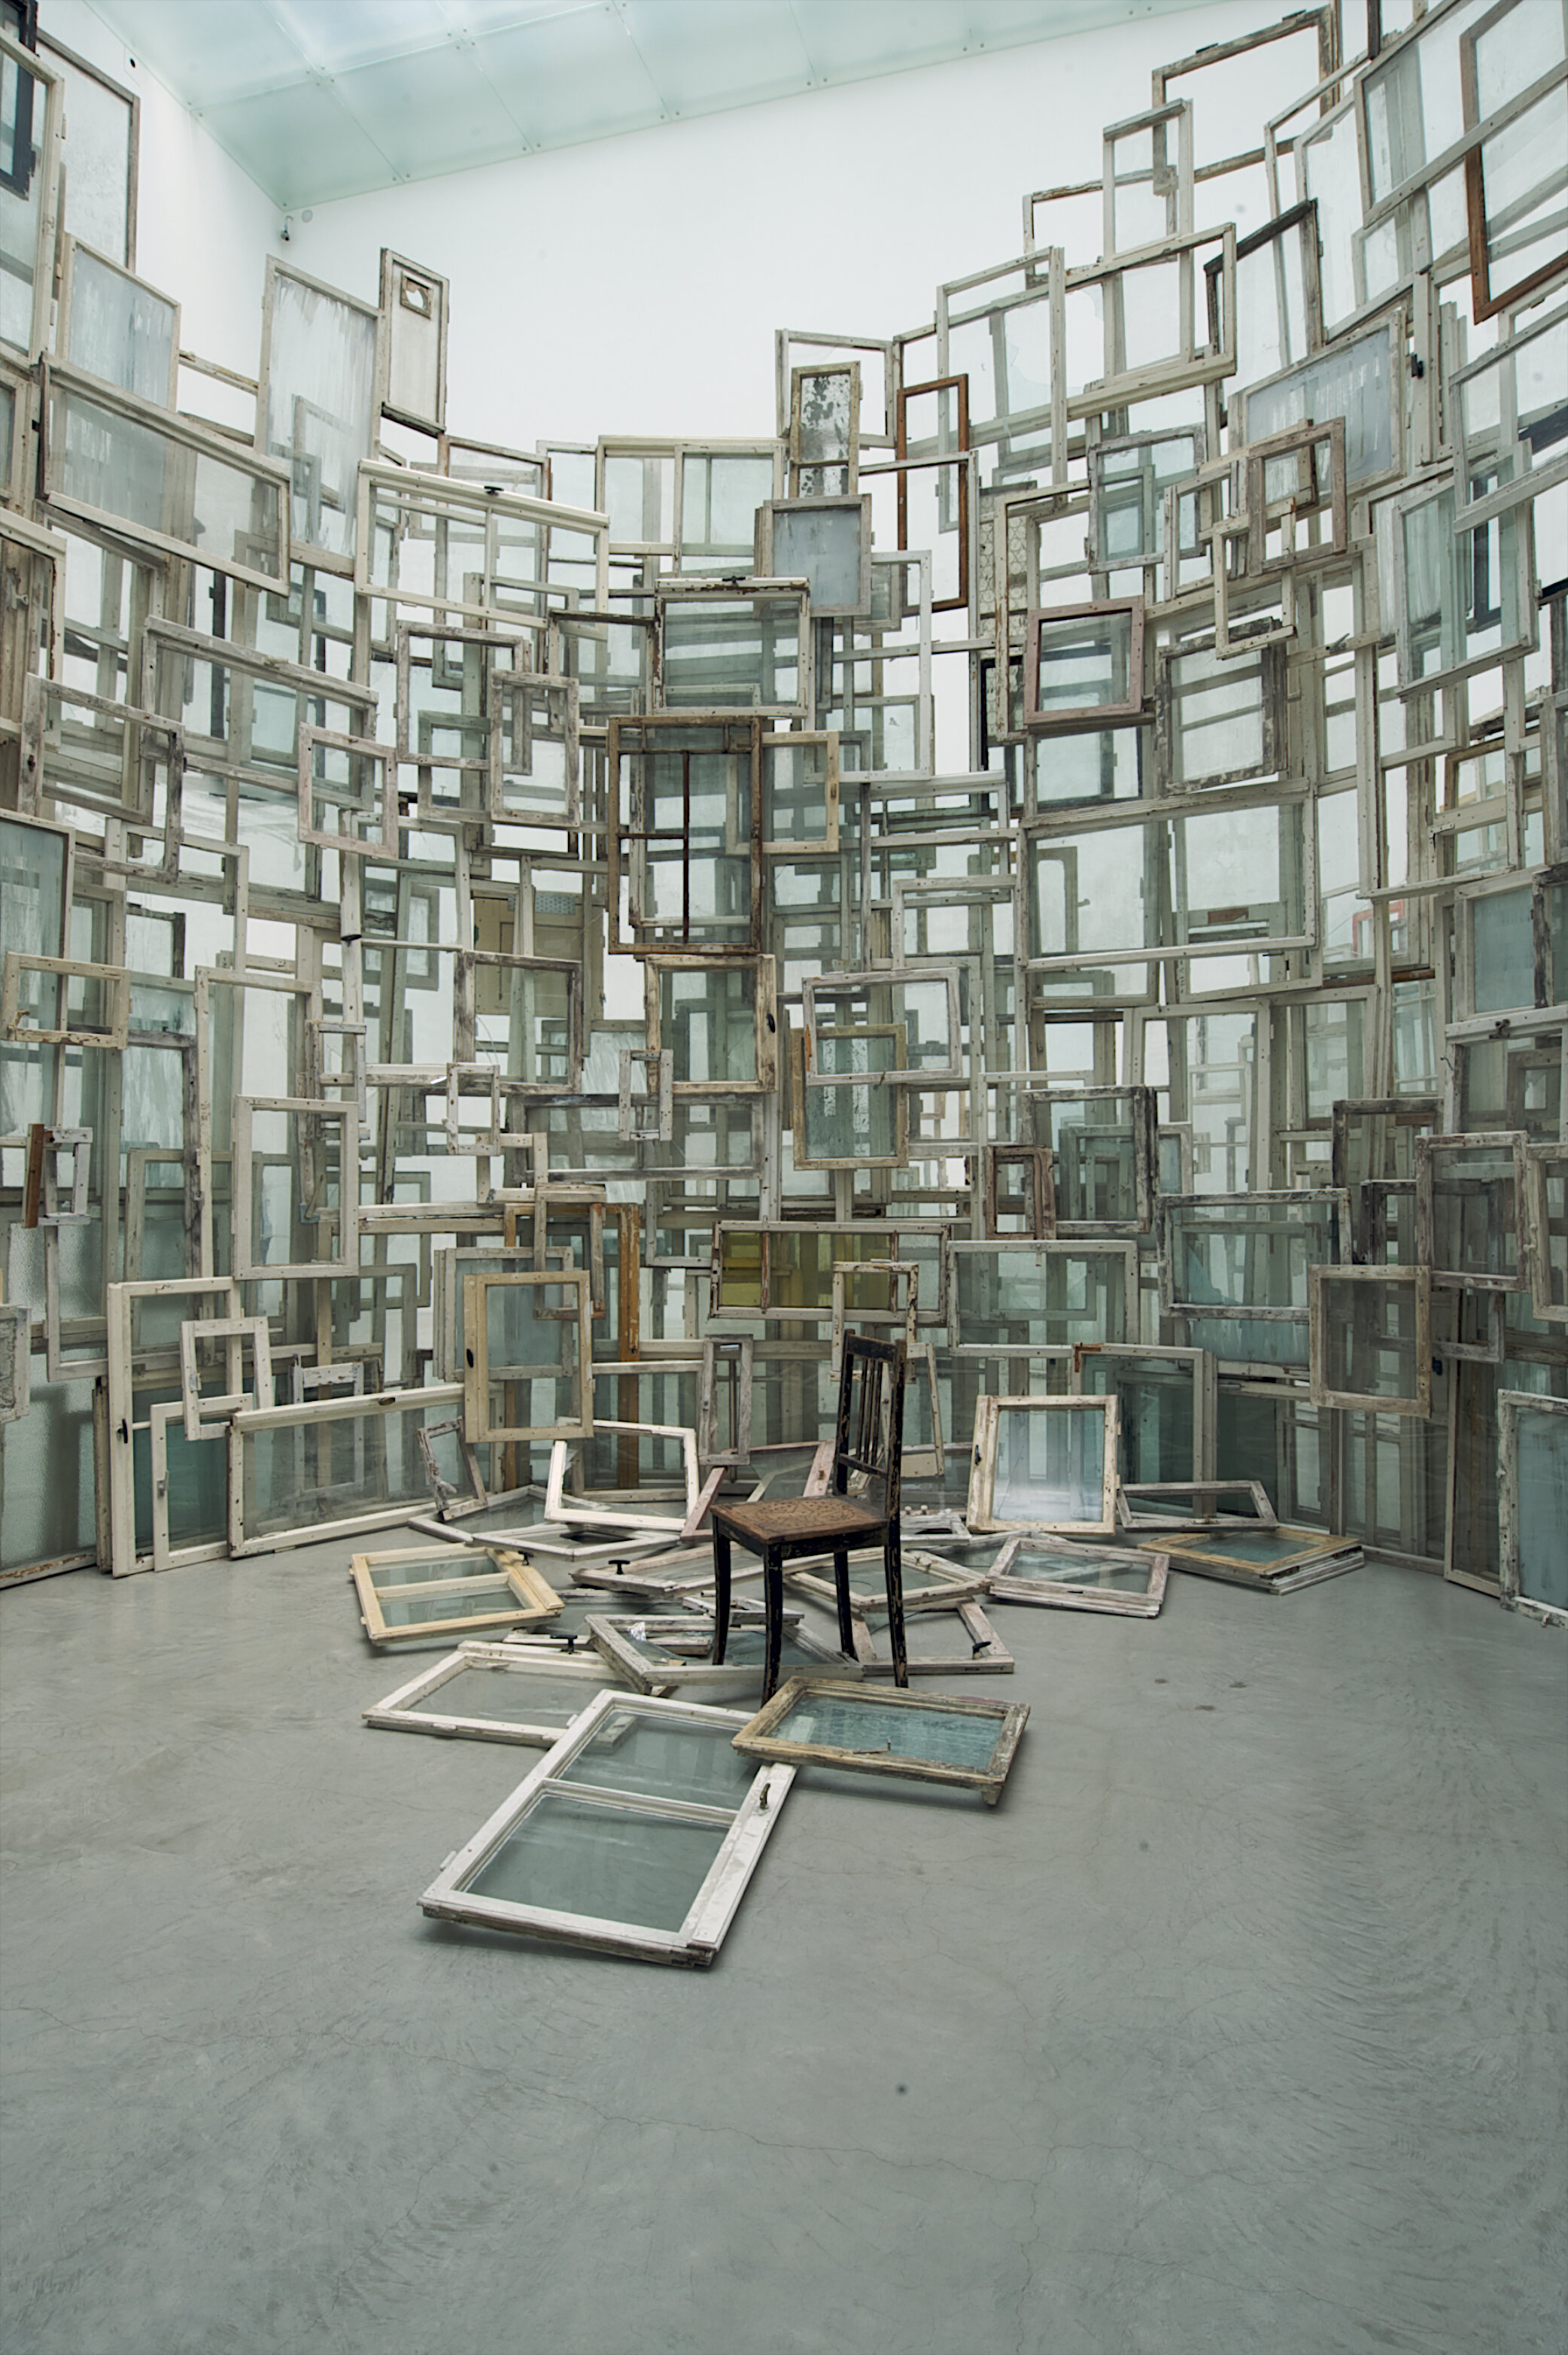 A Room of Memory, 2009